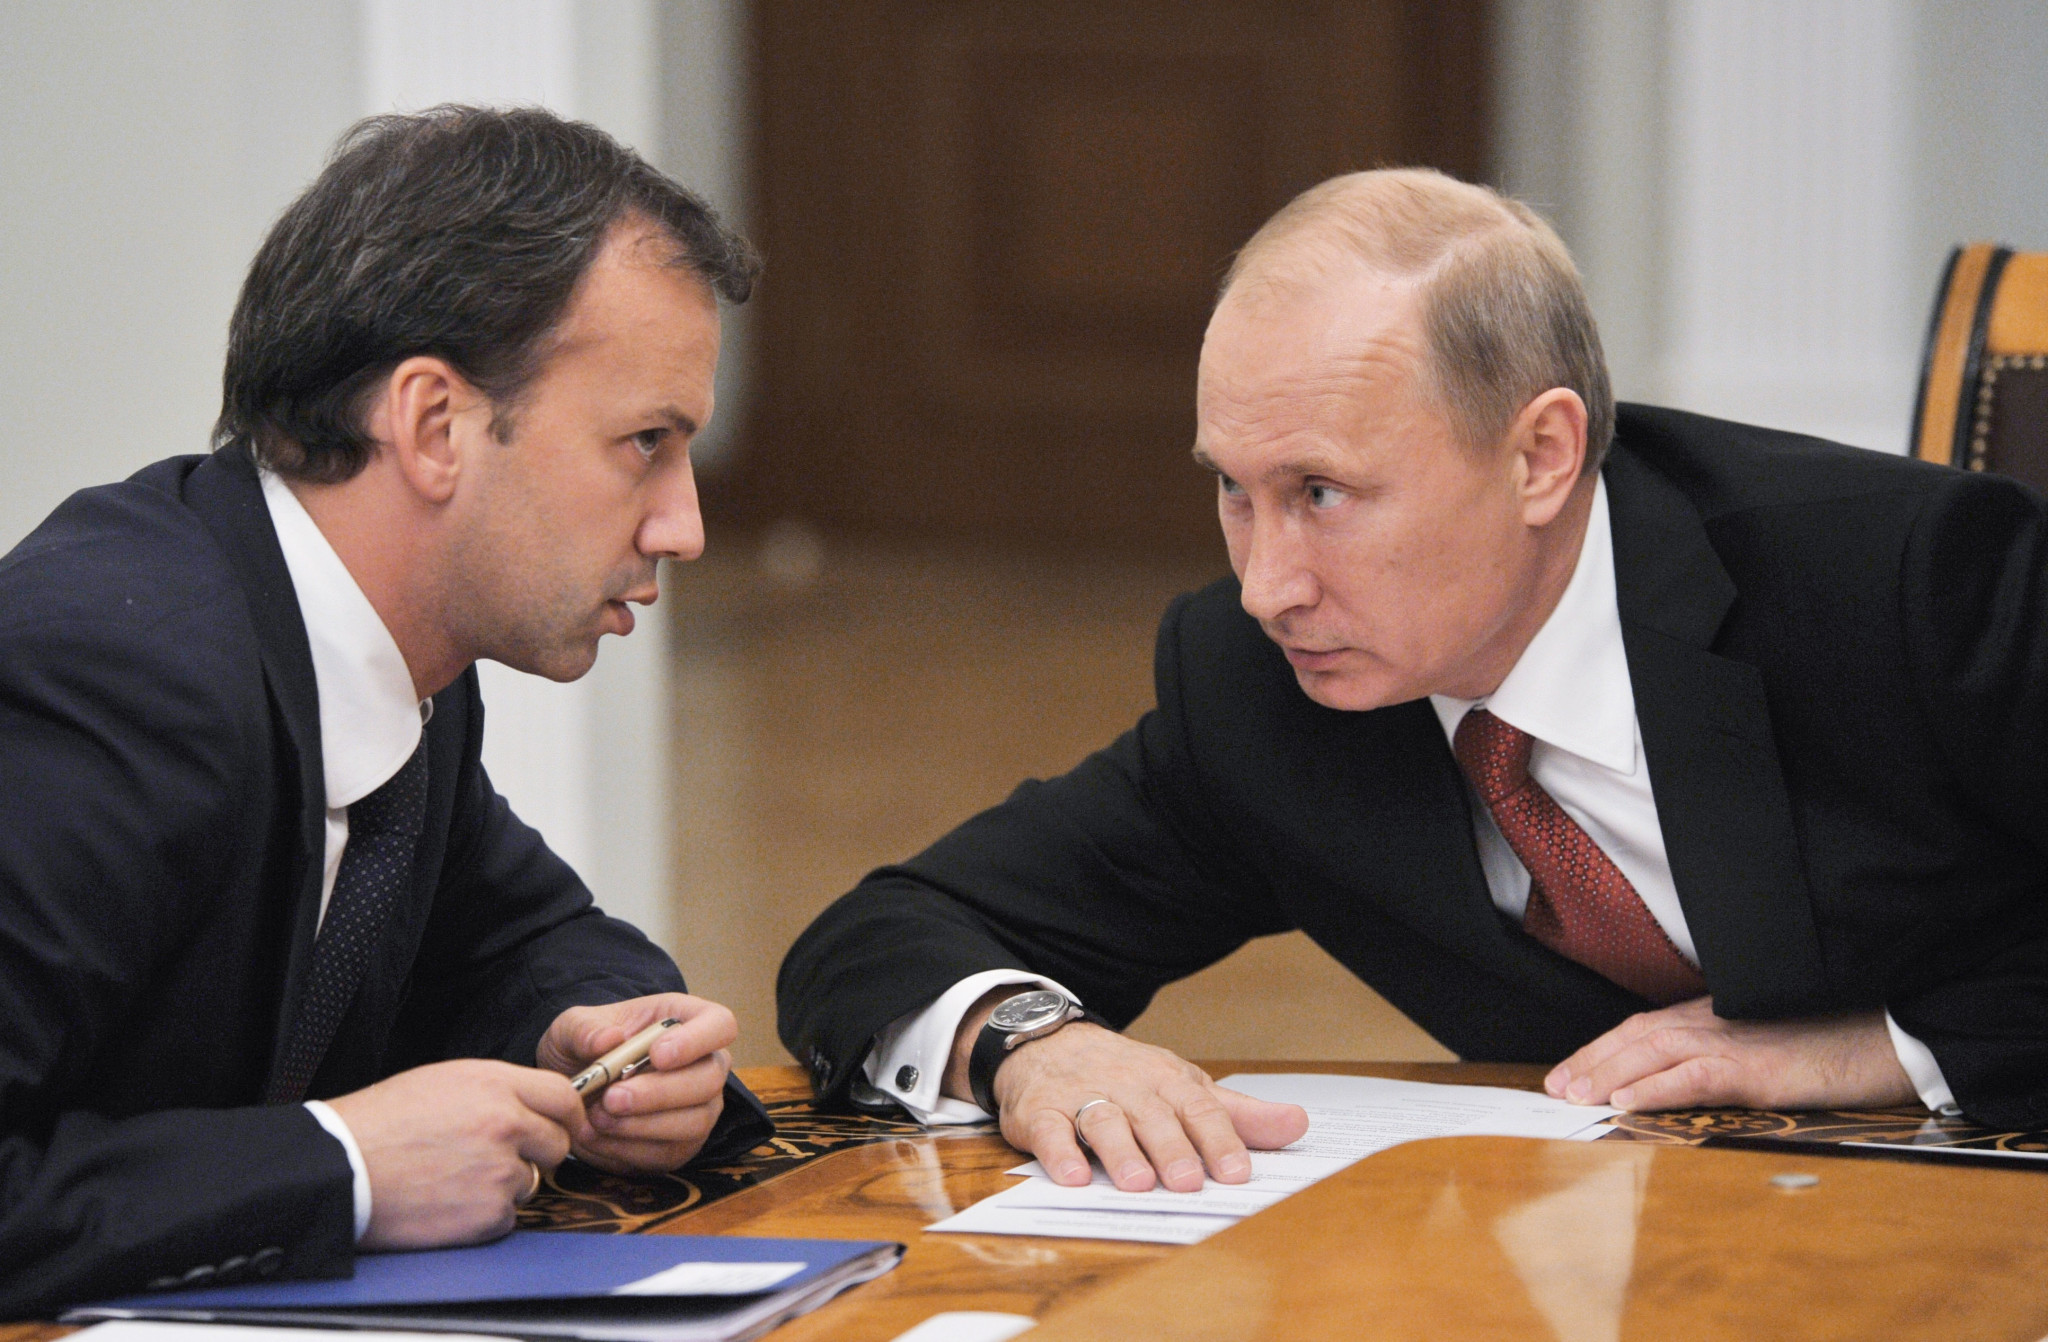 Arkady Dvorkovich, left, was criticised by his election rival for his ties with Russian leaders including Vladimir Putin ©Getty Images